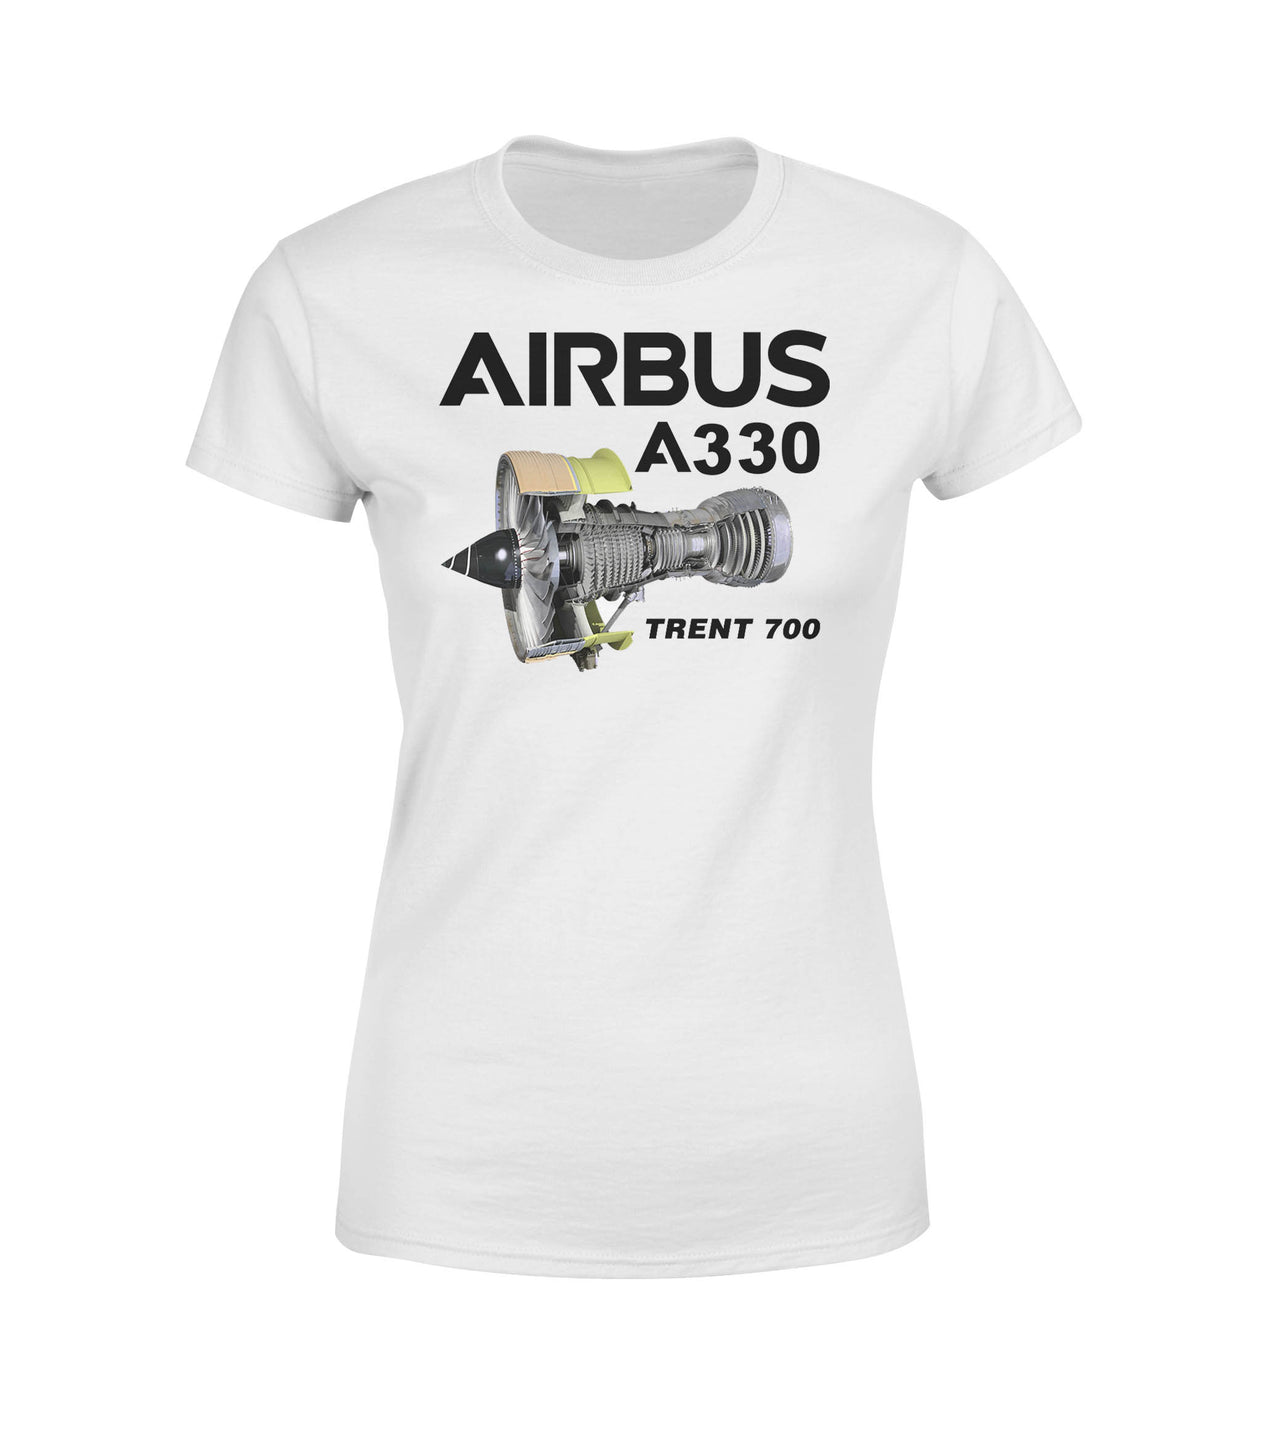 Airbus A330 & Trent 700 Engine Designed Women T-Shirts